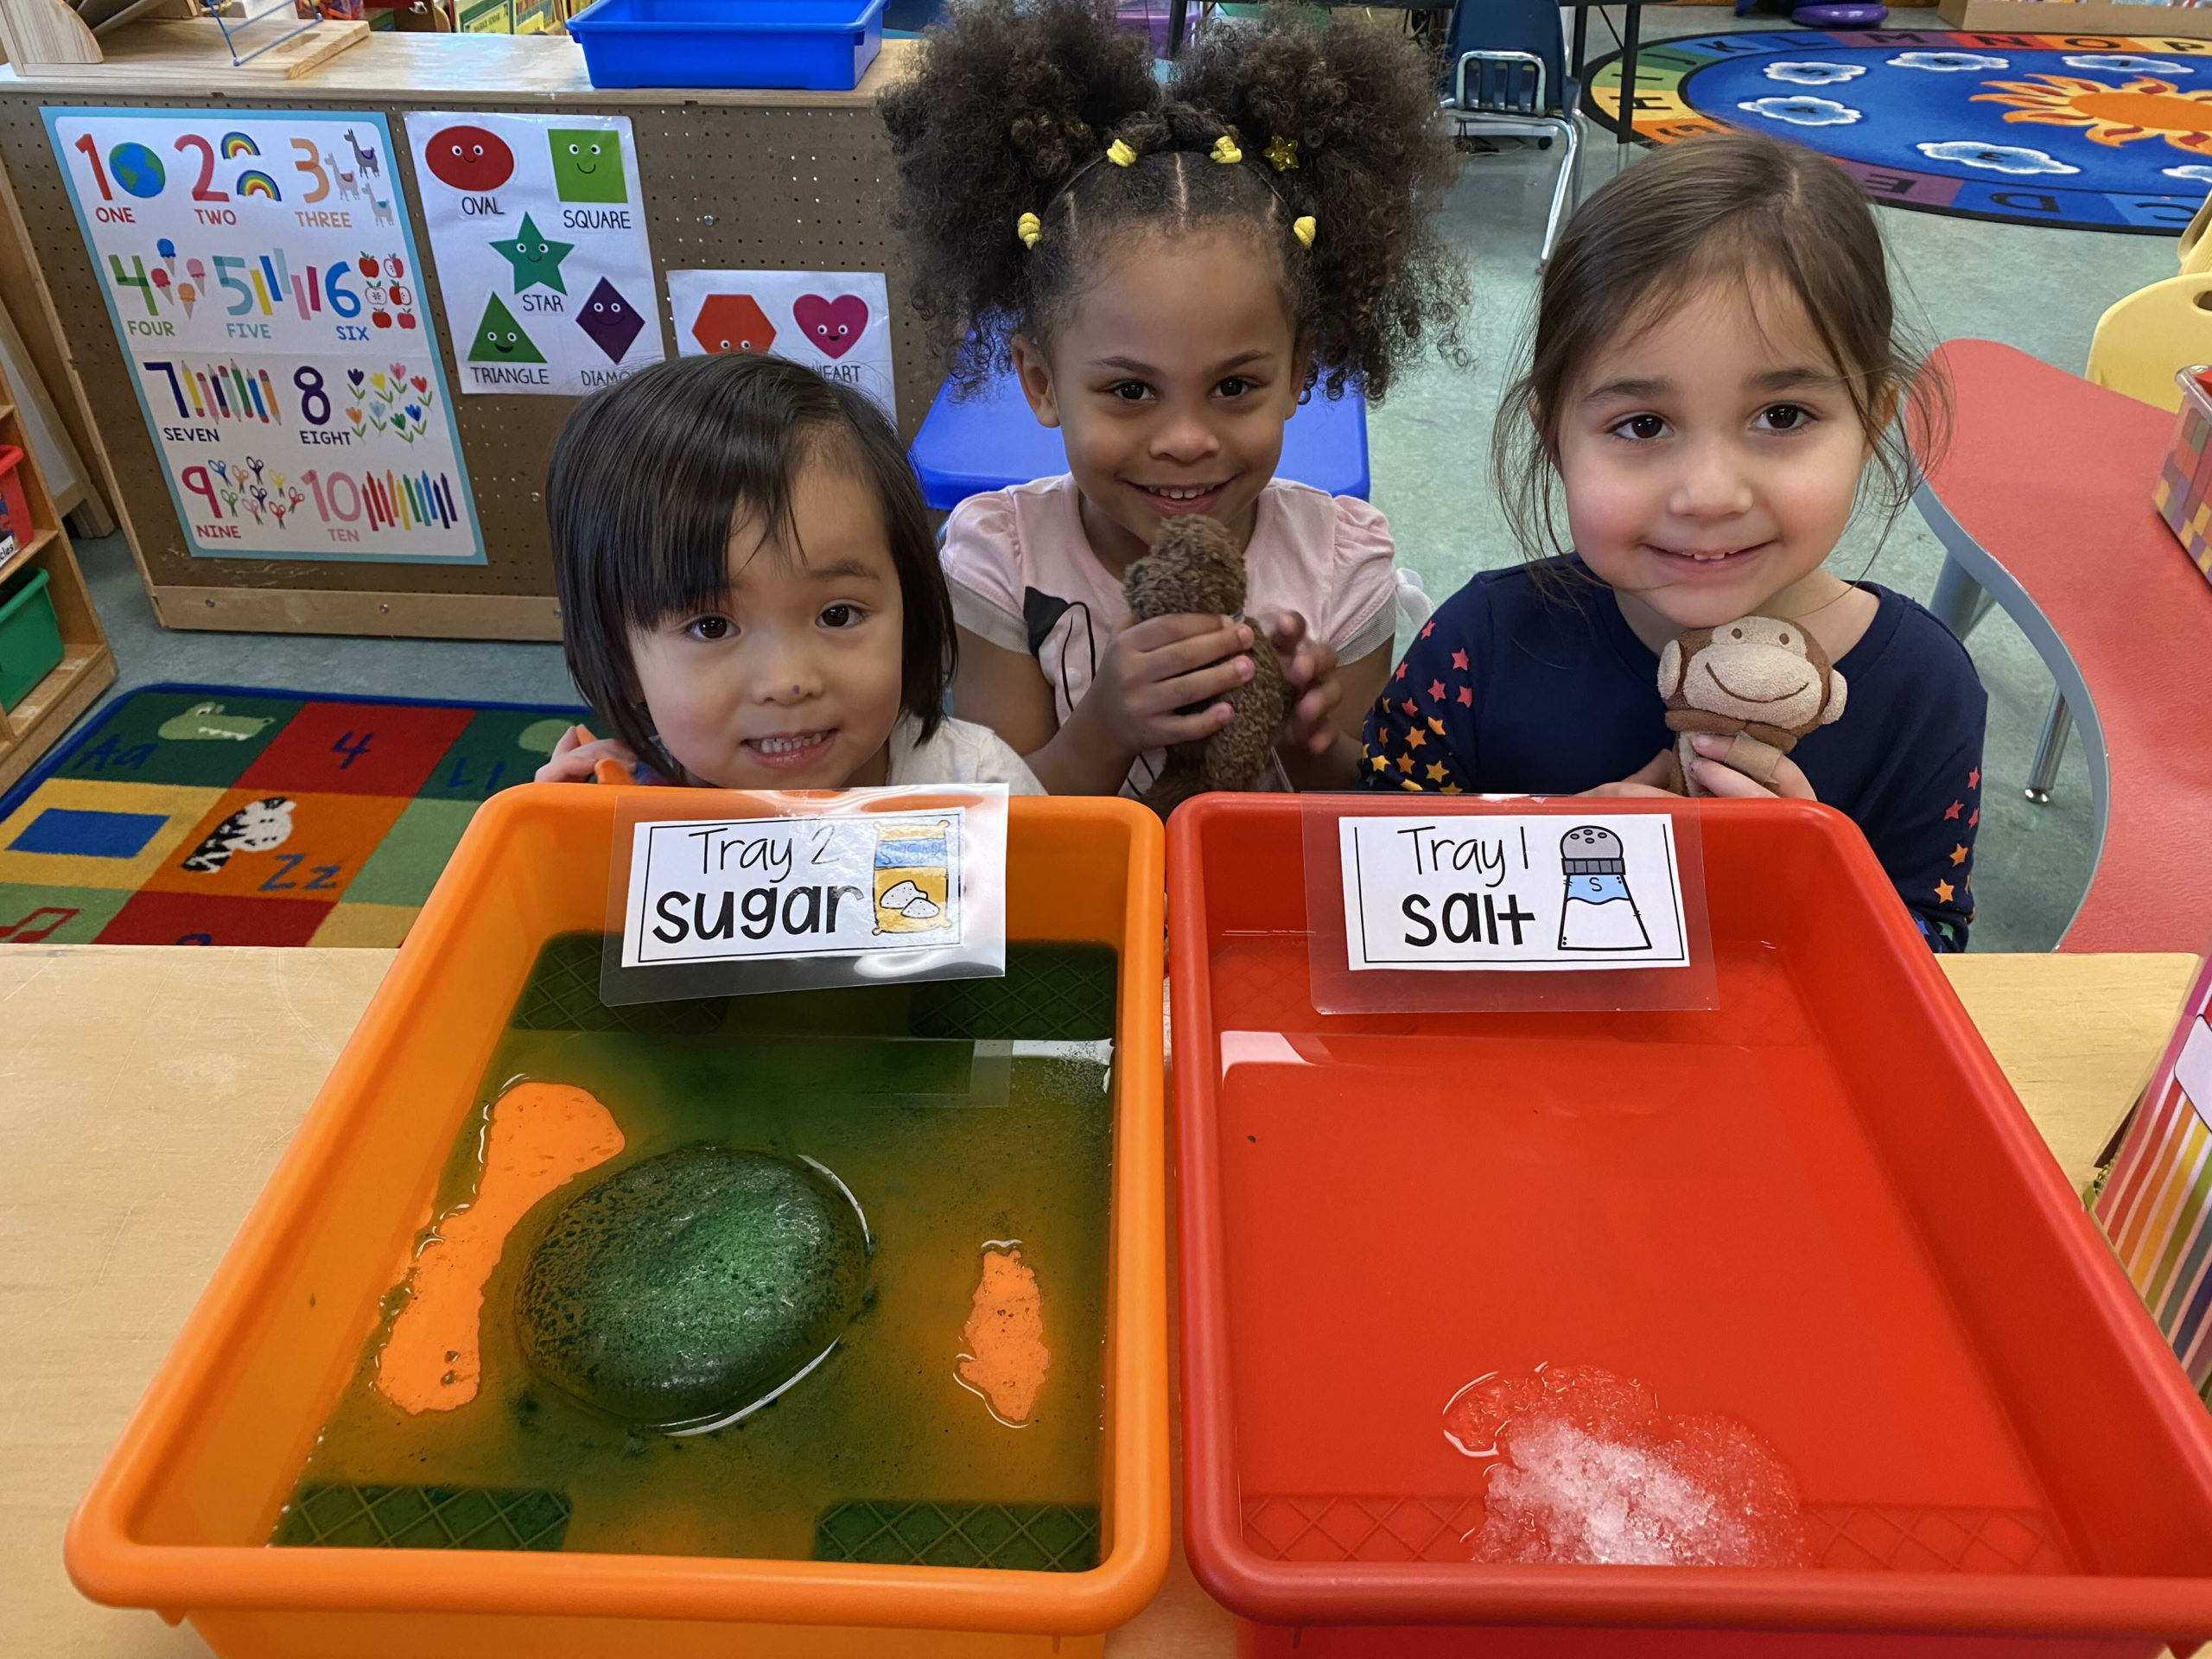 Bridgehampton School pre-K students, including from left, Meia Verzosa, Gianna Walker and Isabel Leon, conducted a science experiment in which hey explored whether salt or sugar would melt an ice block faster. They first made a prediction by casting a vote on a salt or sugar T-chart. Then, they observed the salt and sugar covered ice blocks and drew a picture of their observations. The scientific experiment resulted in learning that the ice melted quicker using the salt. 